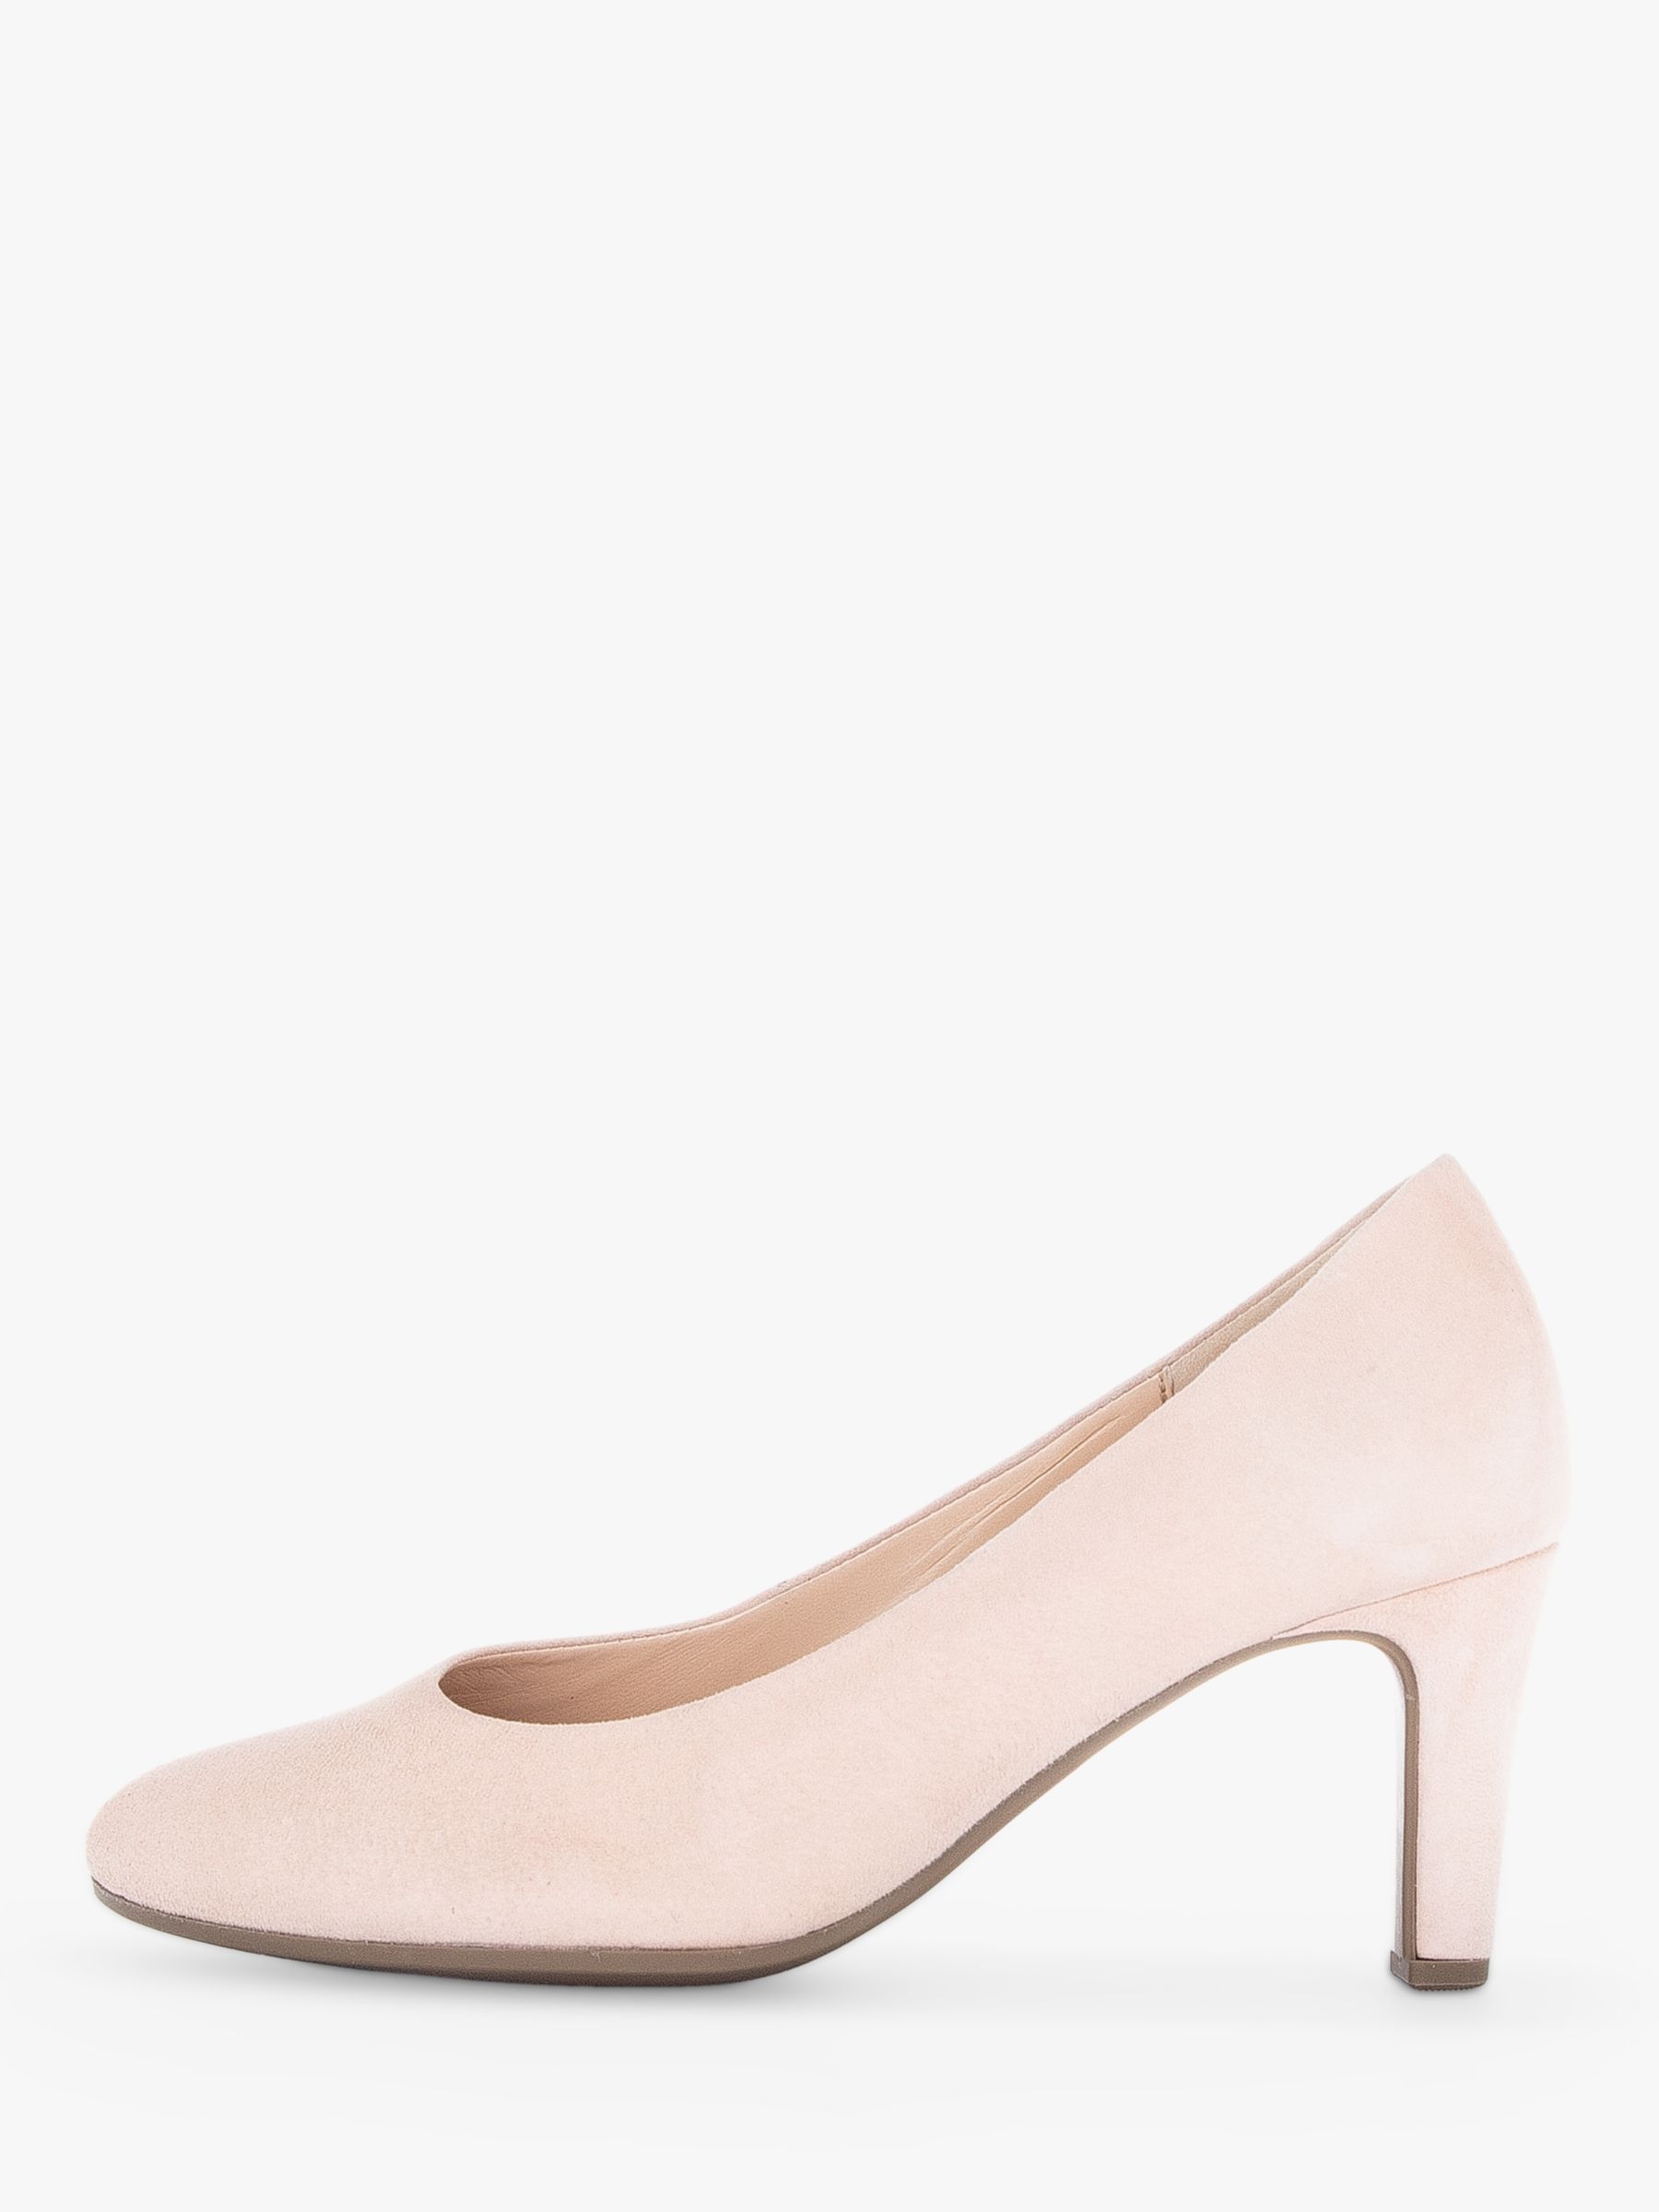 Gabor Edina Suede Cone Heel Court Shoes, Rouge at John Lewis & Partners